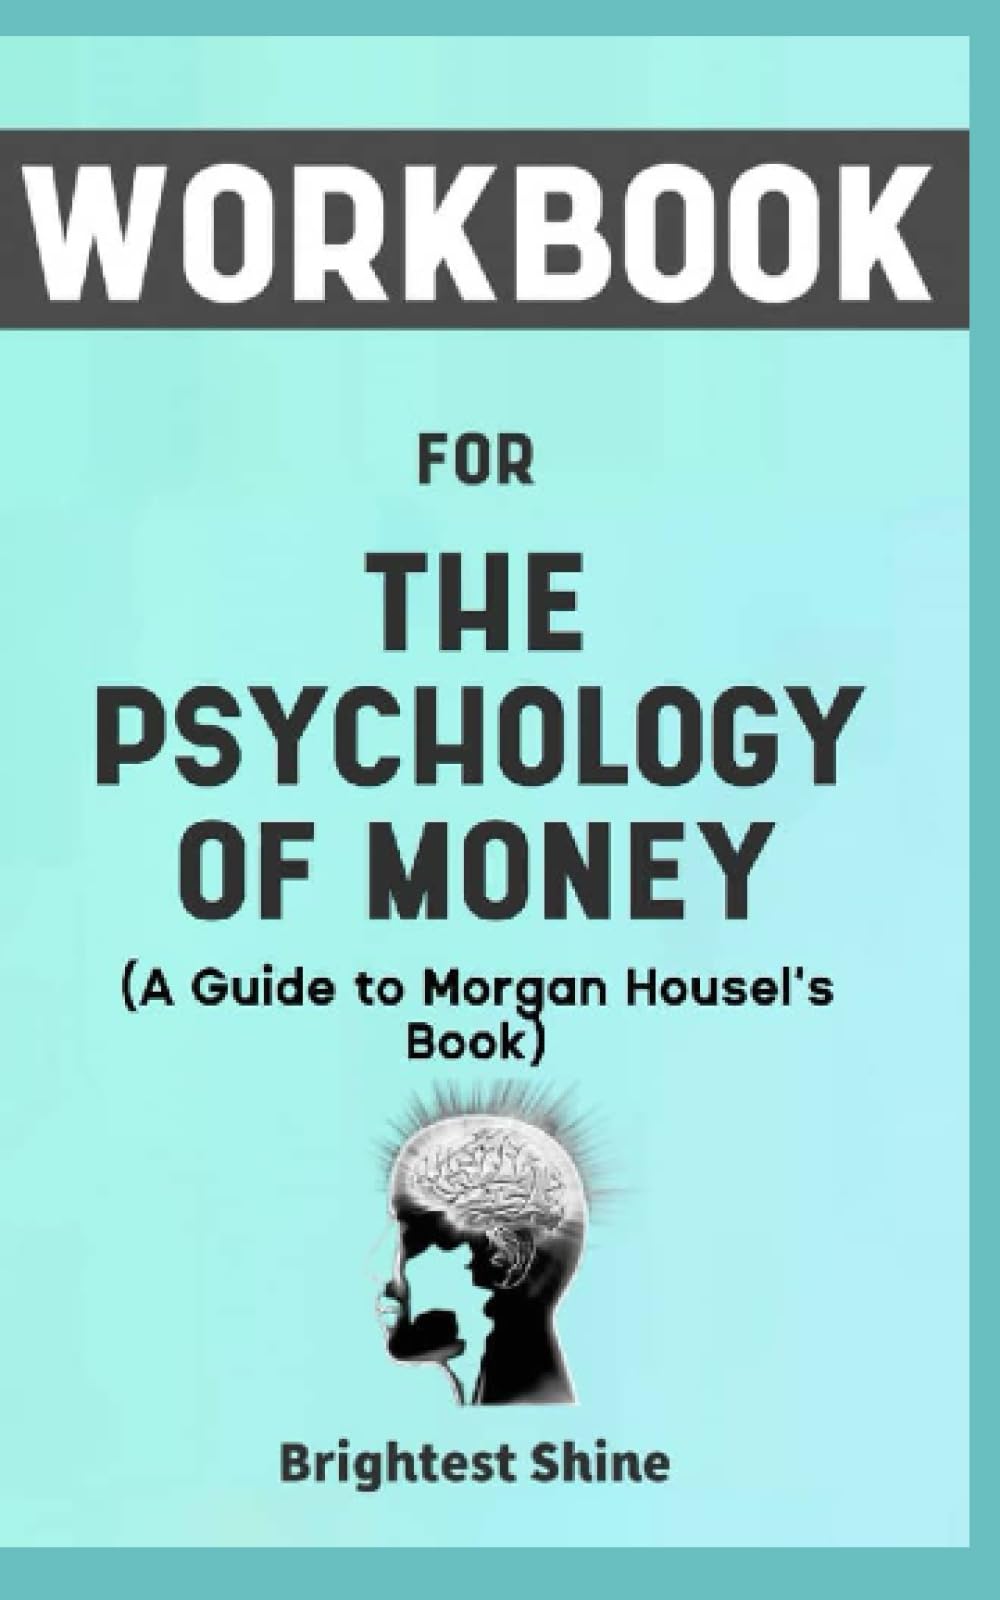 The Psychology Of Money By Morgan Housel (PaperBack Book